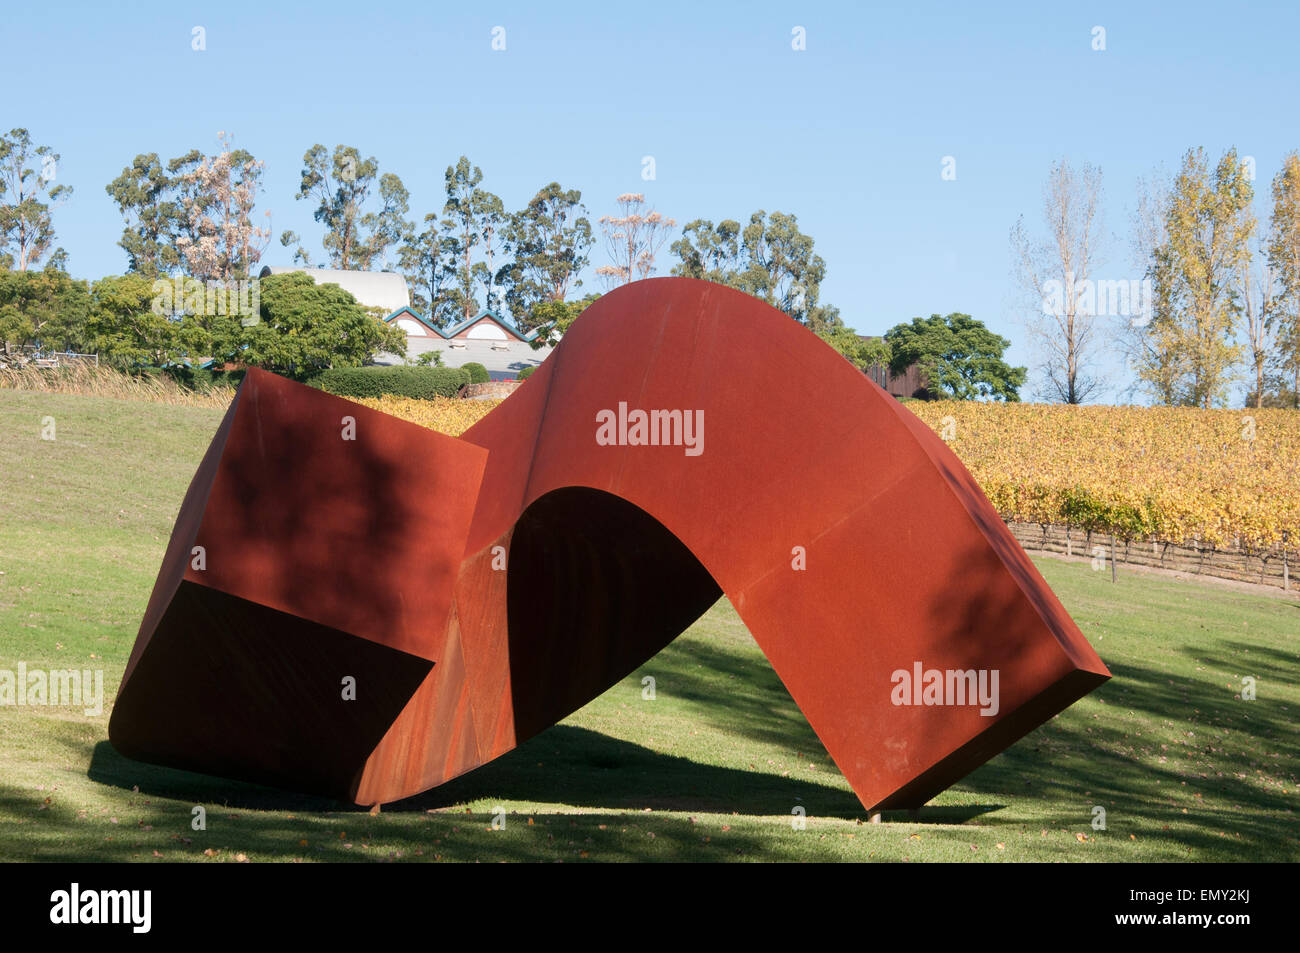 Tarrawarra Museum of Art in the Yarra Valley, Victoria, endowed by the Besen family Stock Photo